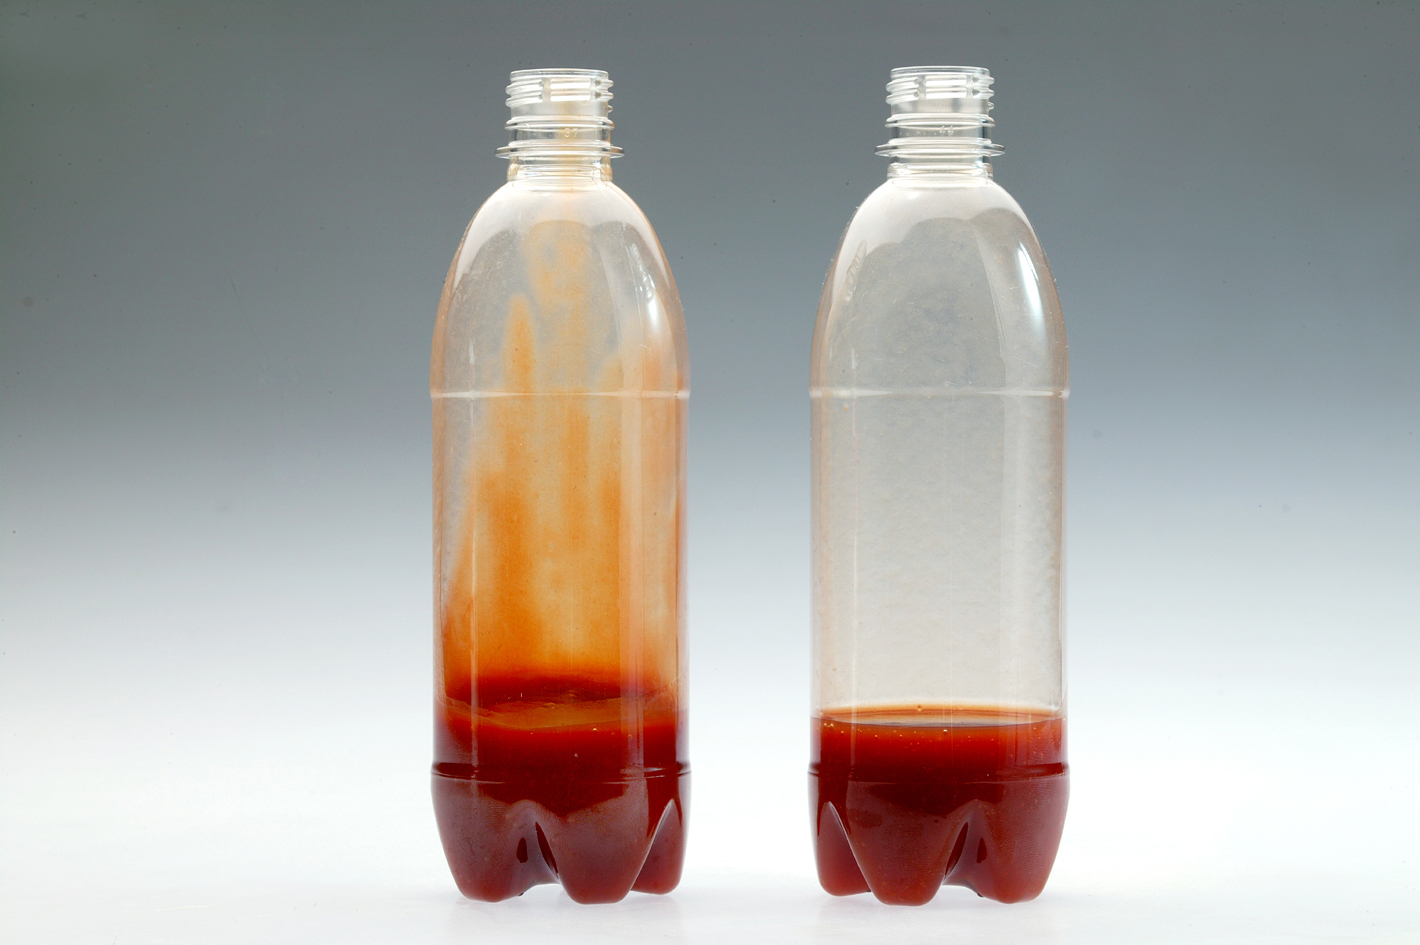 Run-off behaviour of ketchup in an uncoated (left) and a plasma-coated (right) PET bottle.